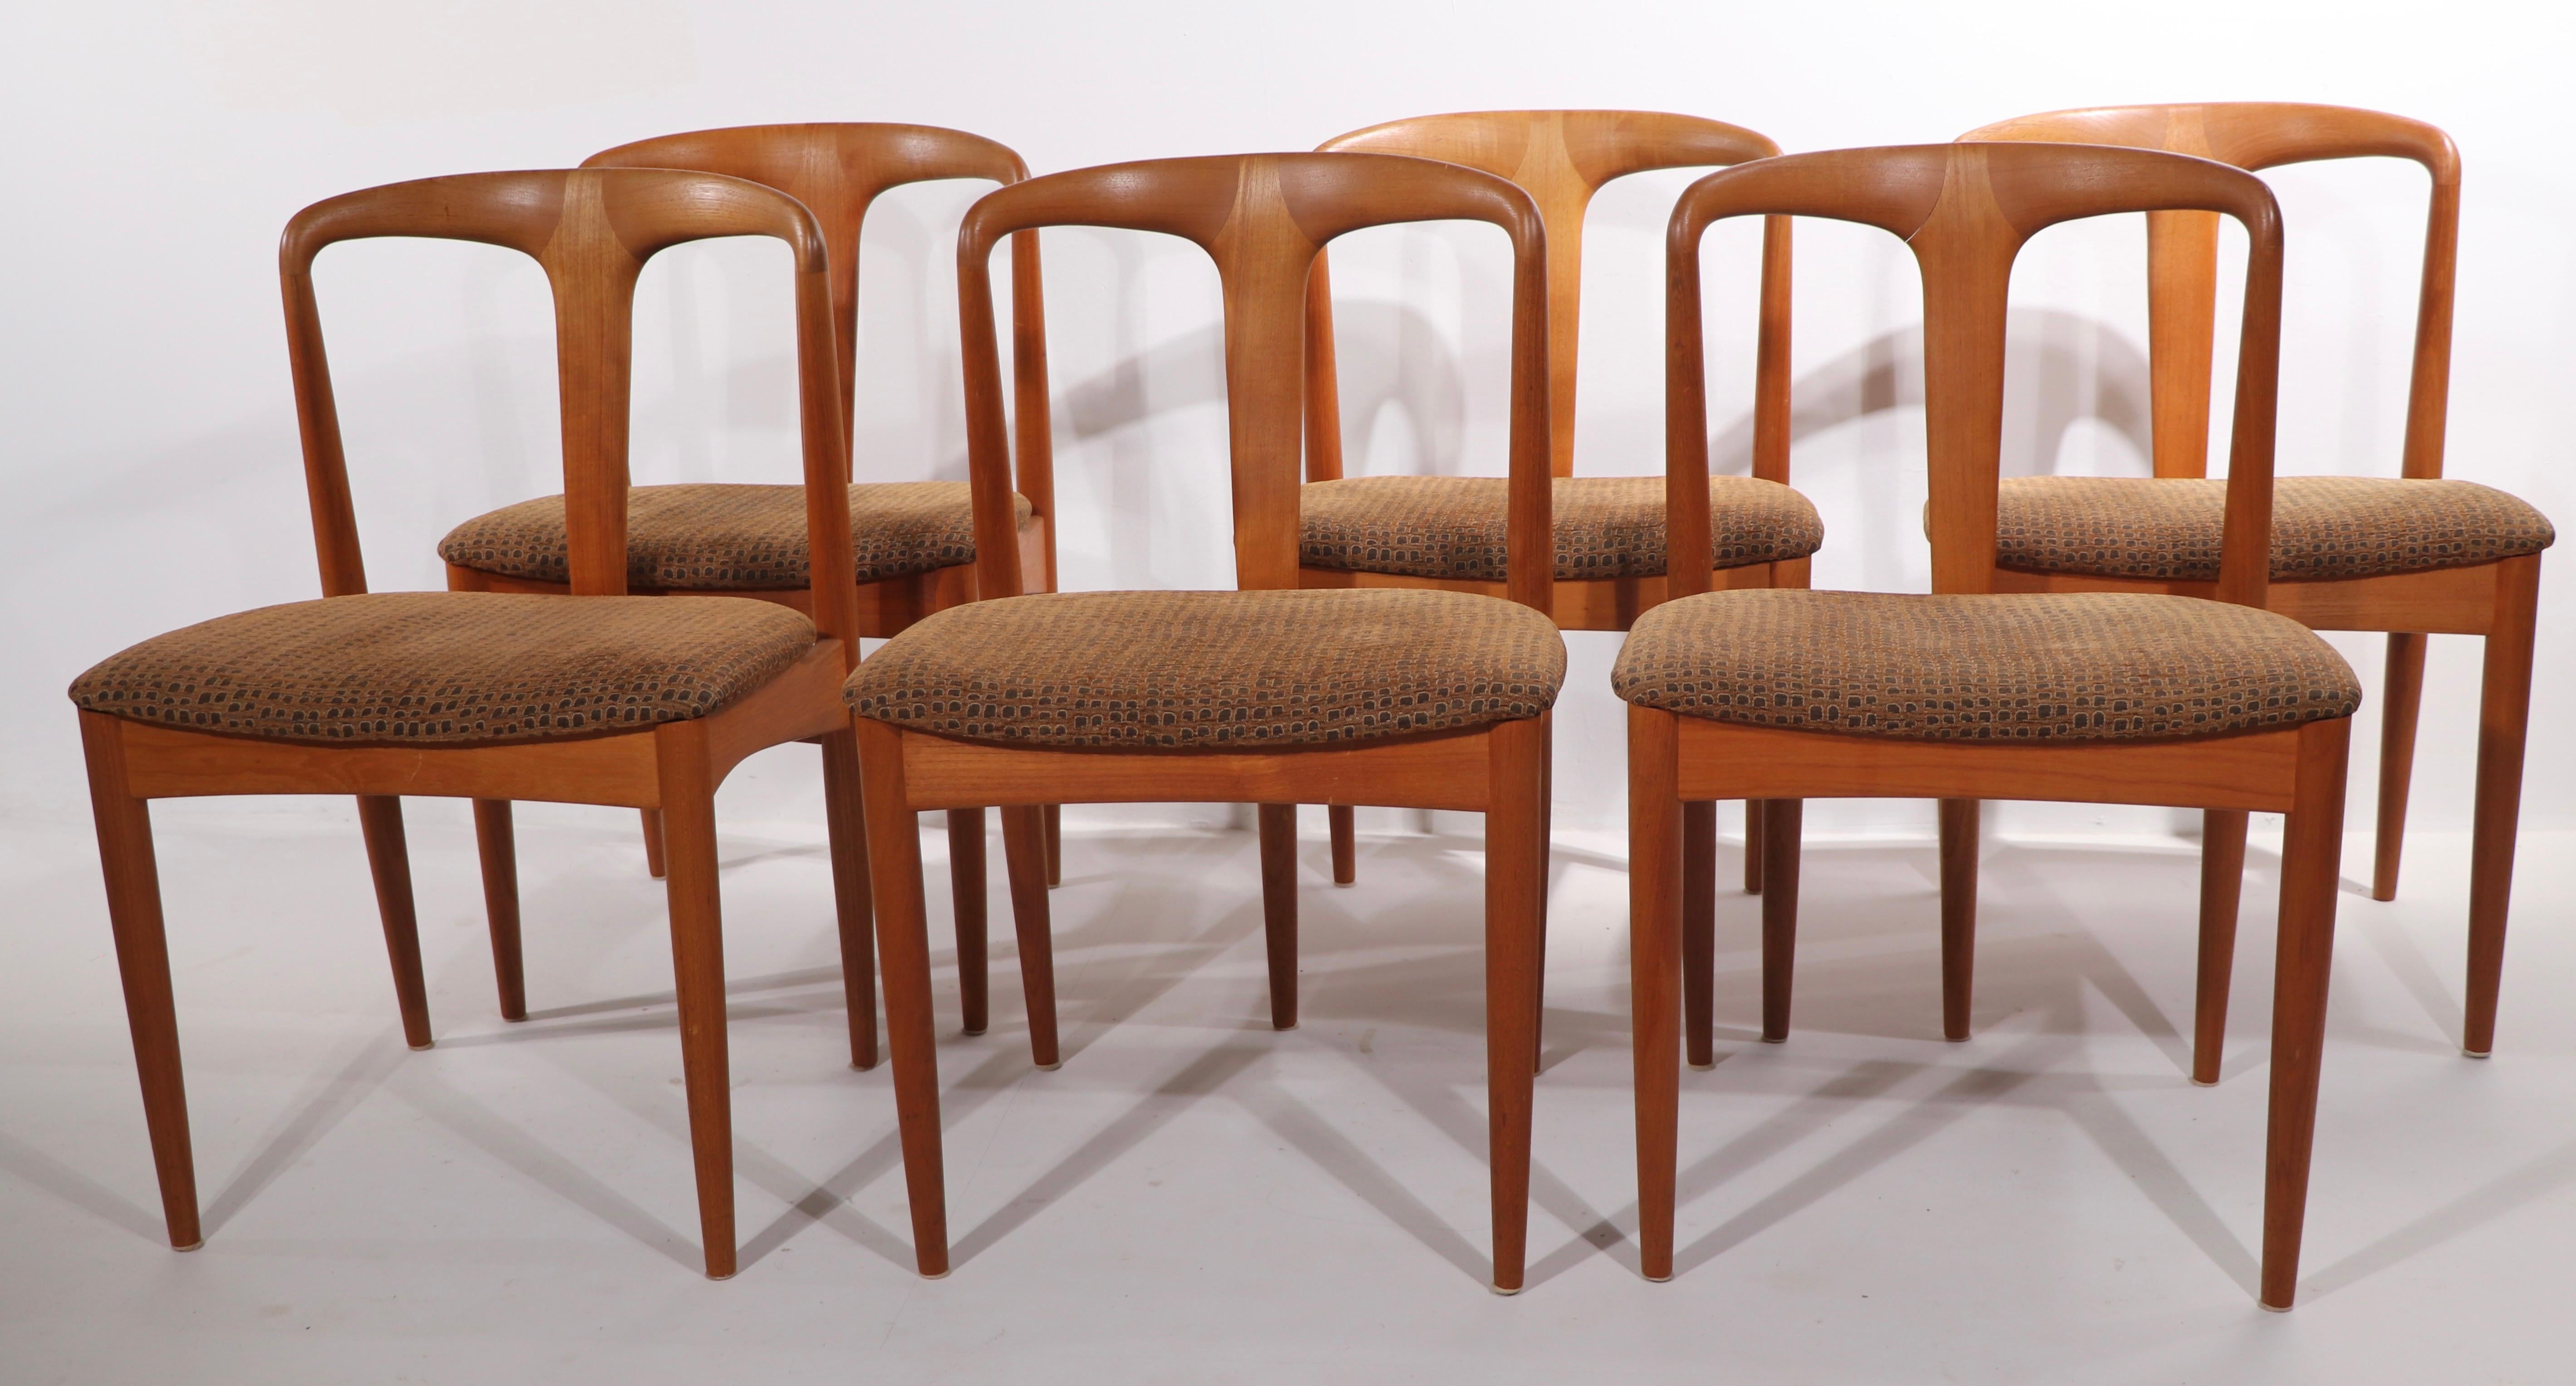 Chic set of six Danish modern dining chairs designed by Johannes Andersen made by Uldum Møbelfabrik, circa 1960's. These stylish chairs are executed in solid teak, with original upholstered seats. All are in very good, original condition, clean and